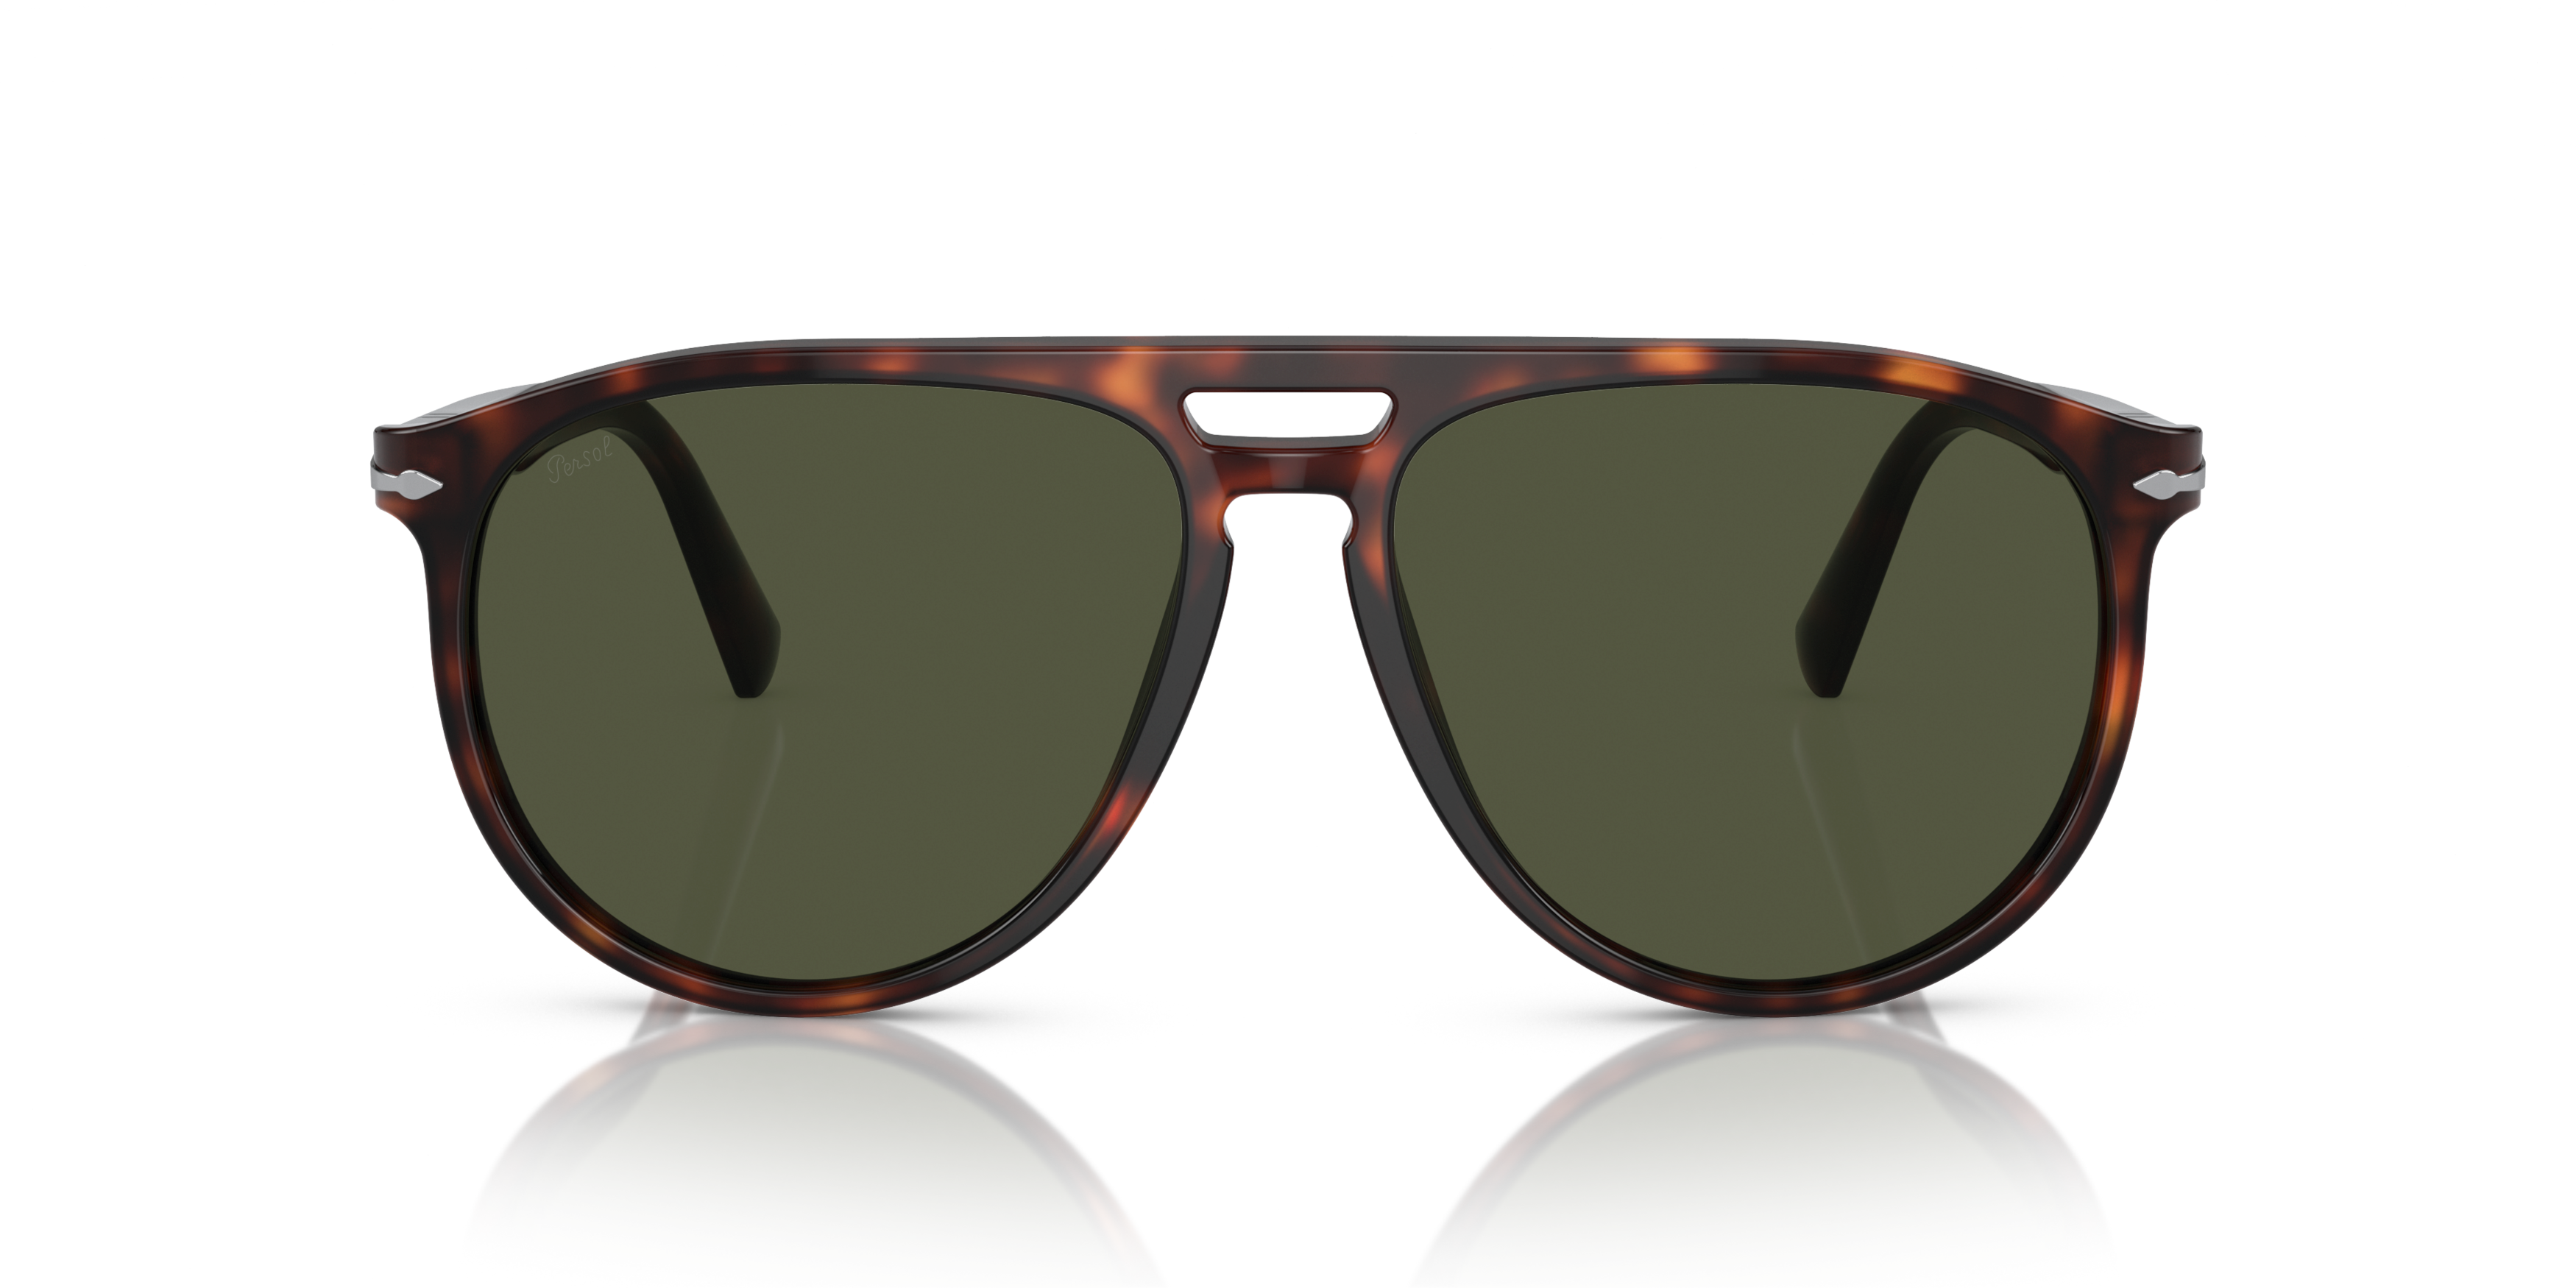 [products.image.front] PERSOL PO3311S 24/31